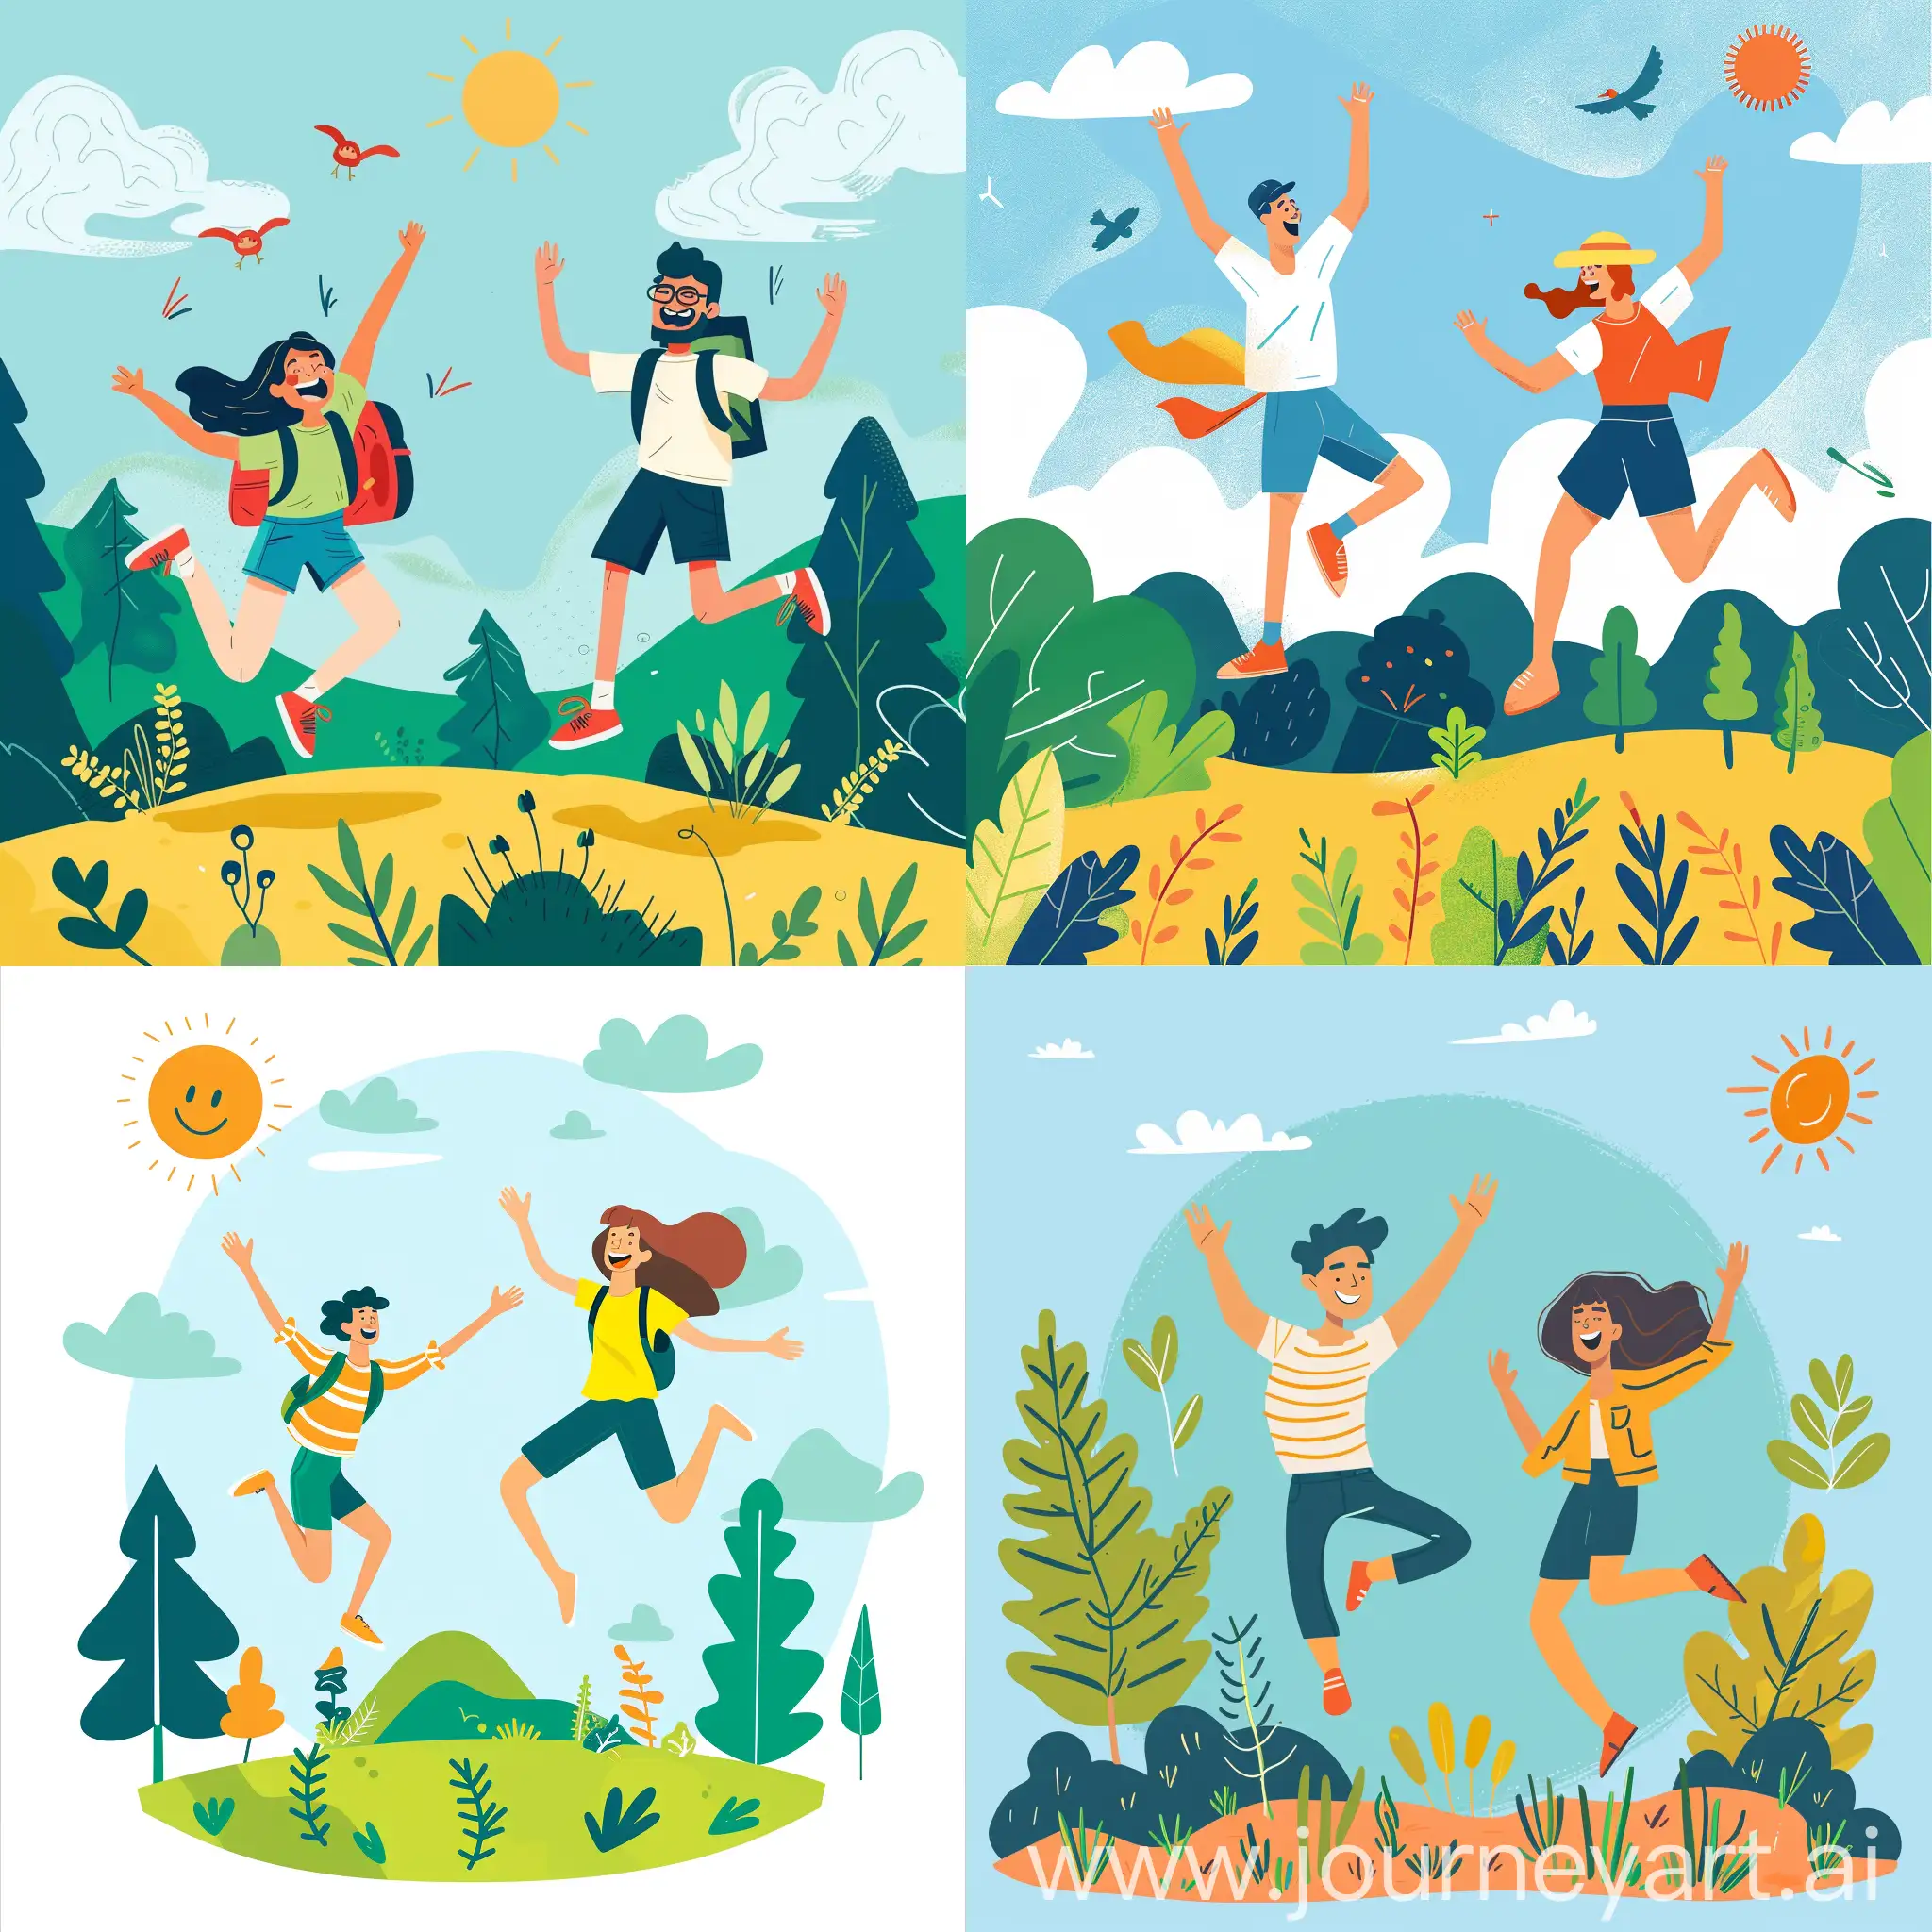 Cheerful-Outdoor-Summer-Camp-Activity-Man-Jumping-and-Woman-Laughing-in-Nature